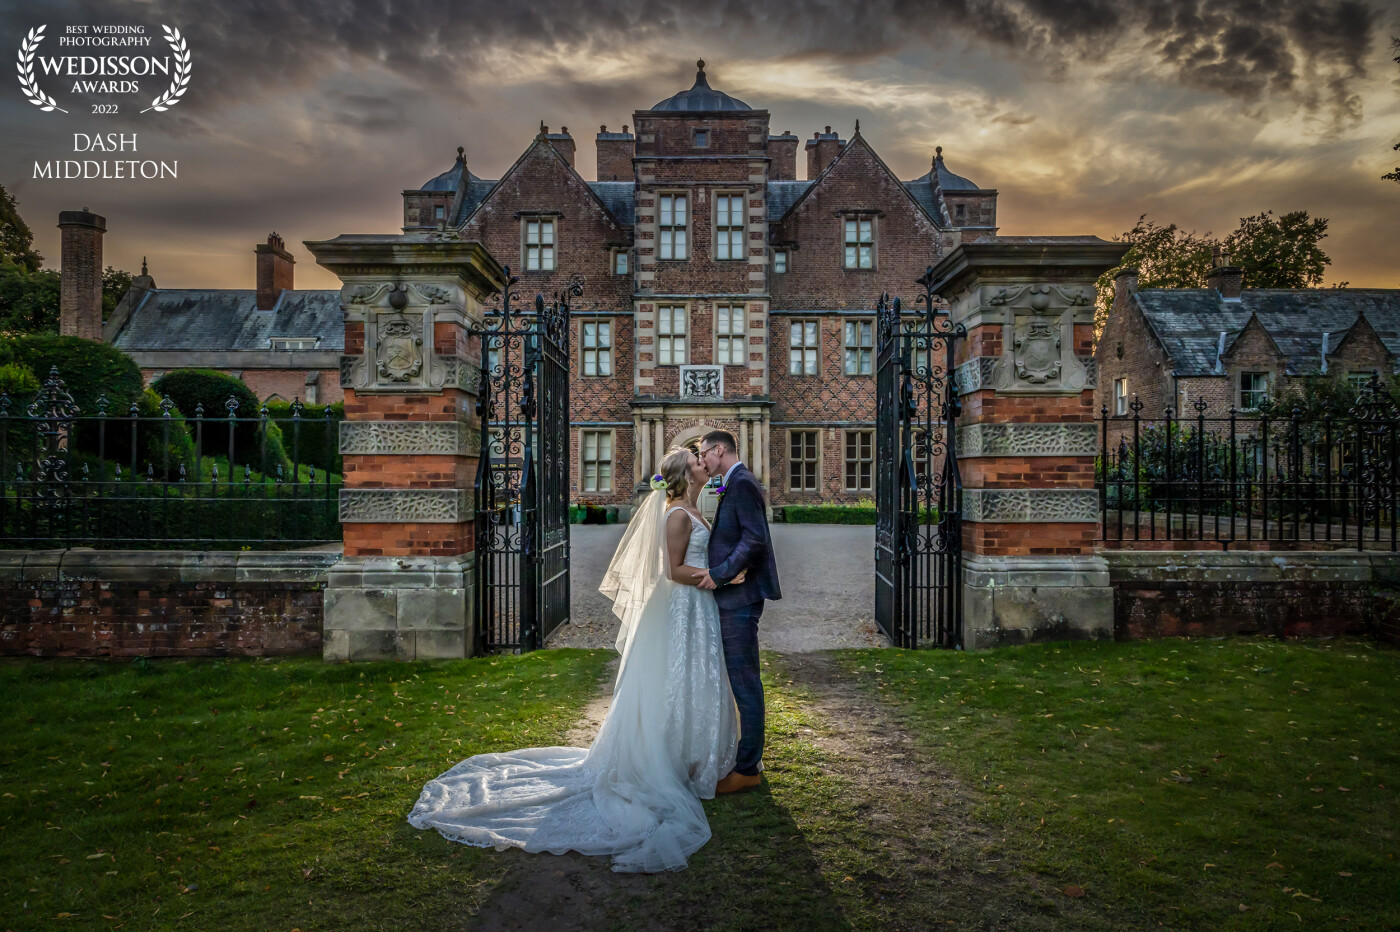 Dani & Marc at Kiplin Hall & Gardens, North Yorks  - we waited a little while for this, just enough for the Sun to poke out from the clouds before dipping behind the landscape.